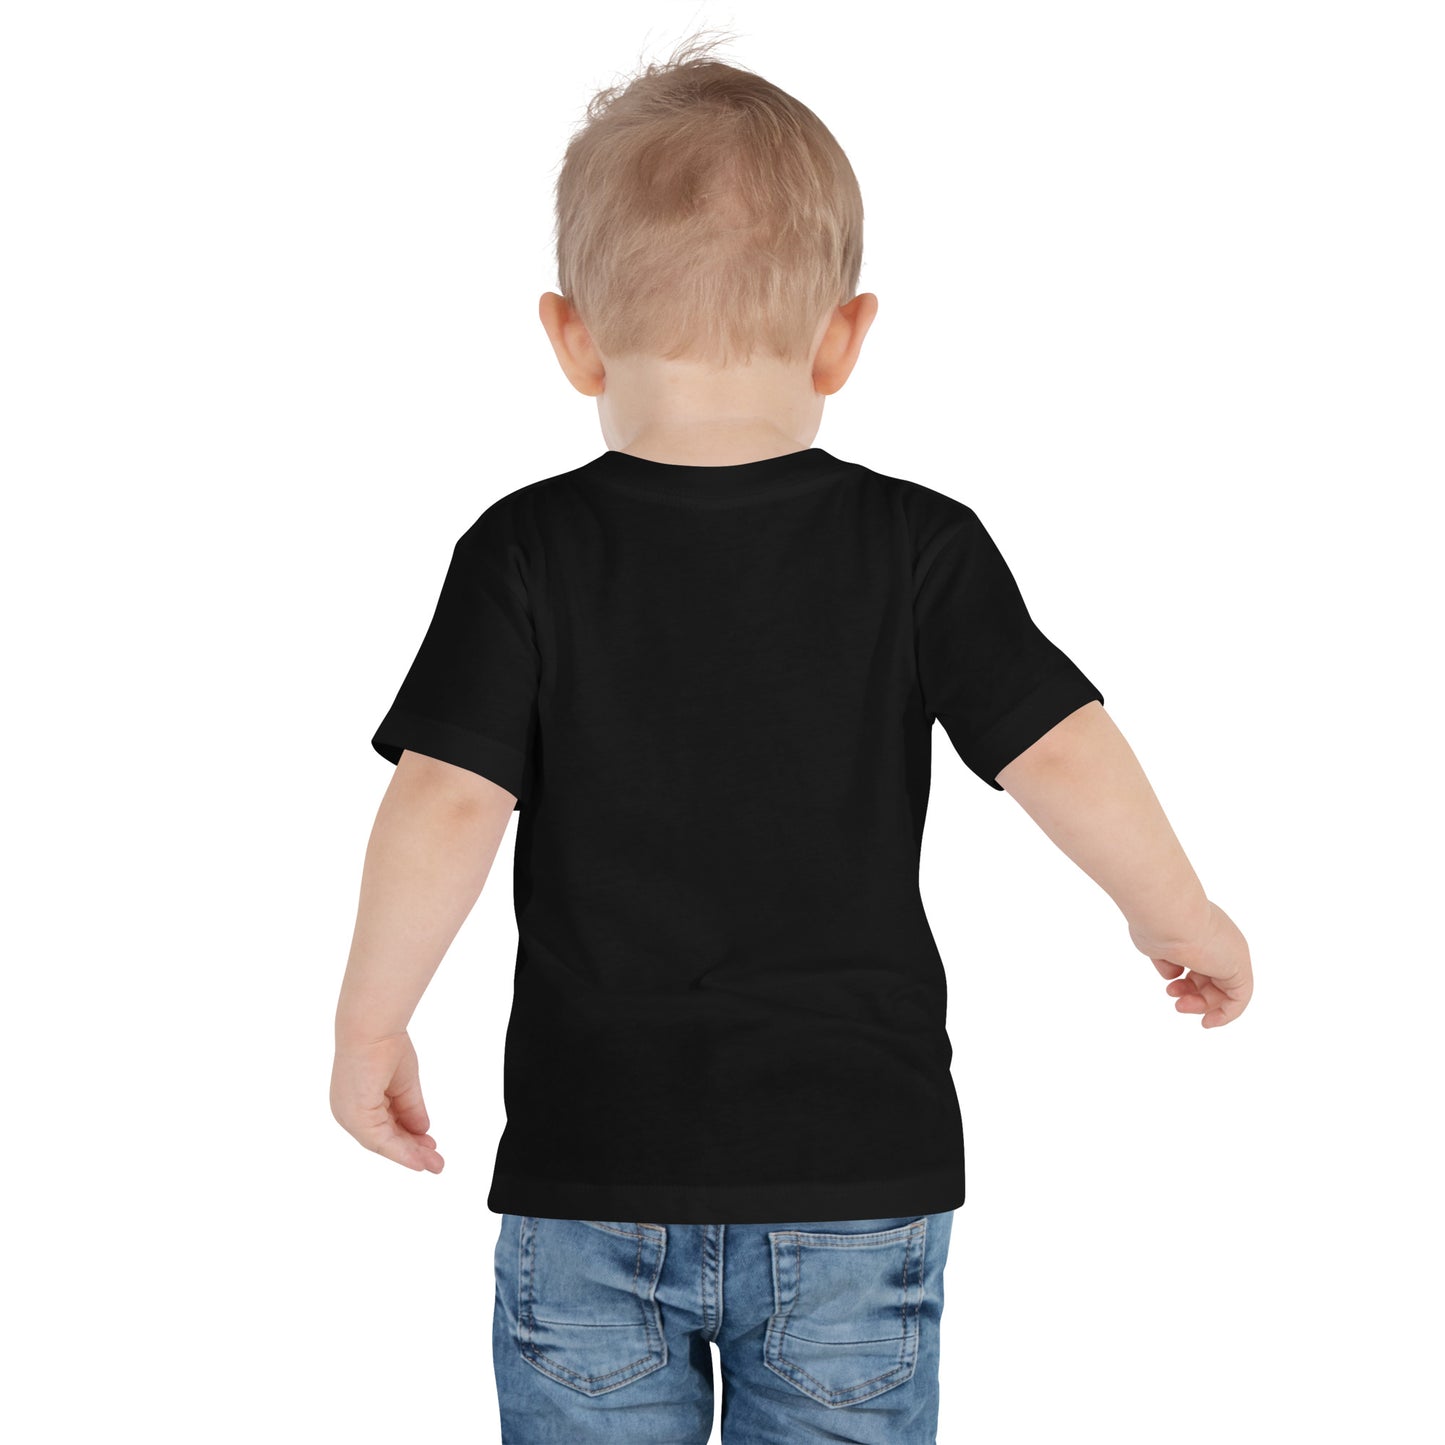 Toddler T-Shirt Cotton: Color Block Green with Pickleball (black)